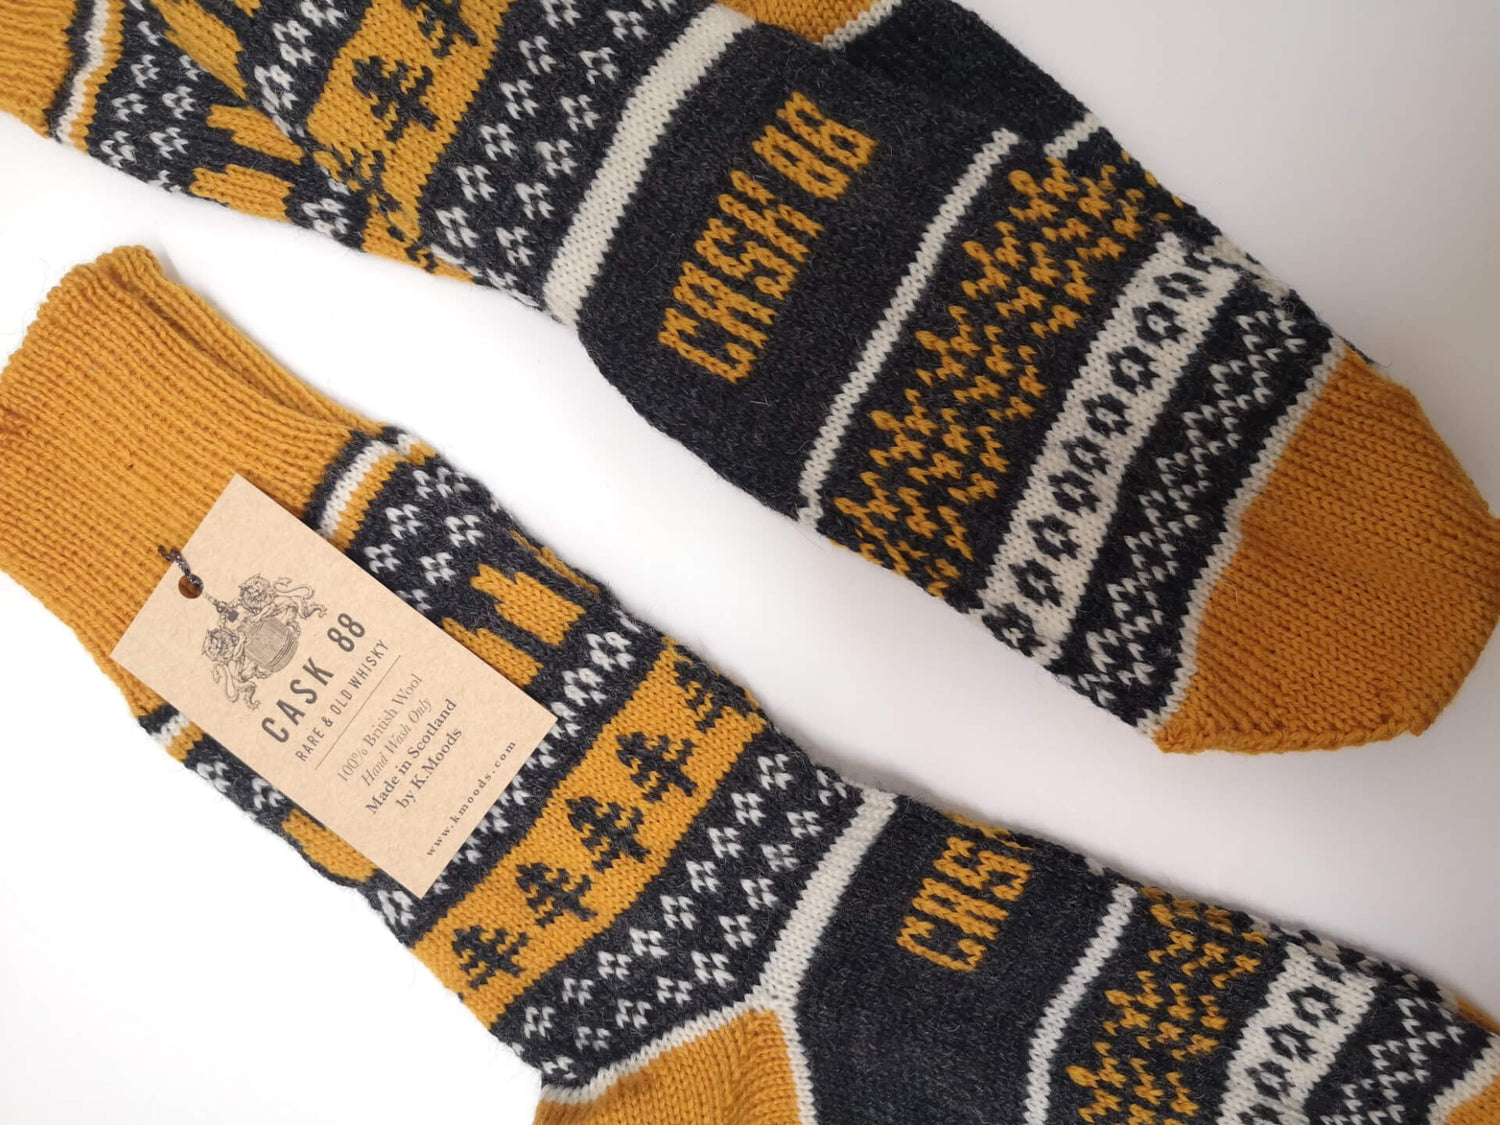 A pair of knitted Fair Isle socks featuring grey, white, and mustard yellow patterns.